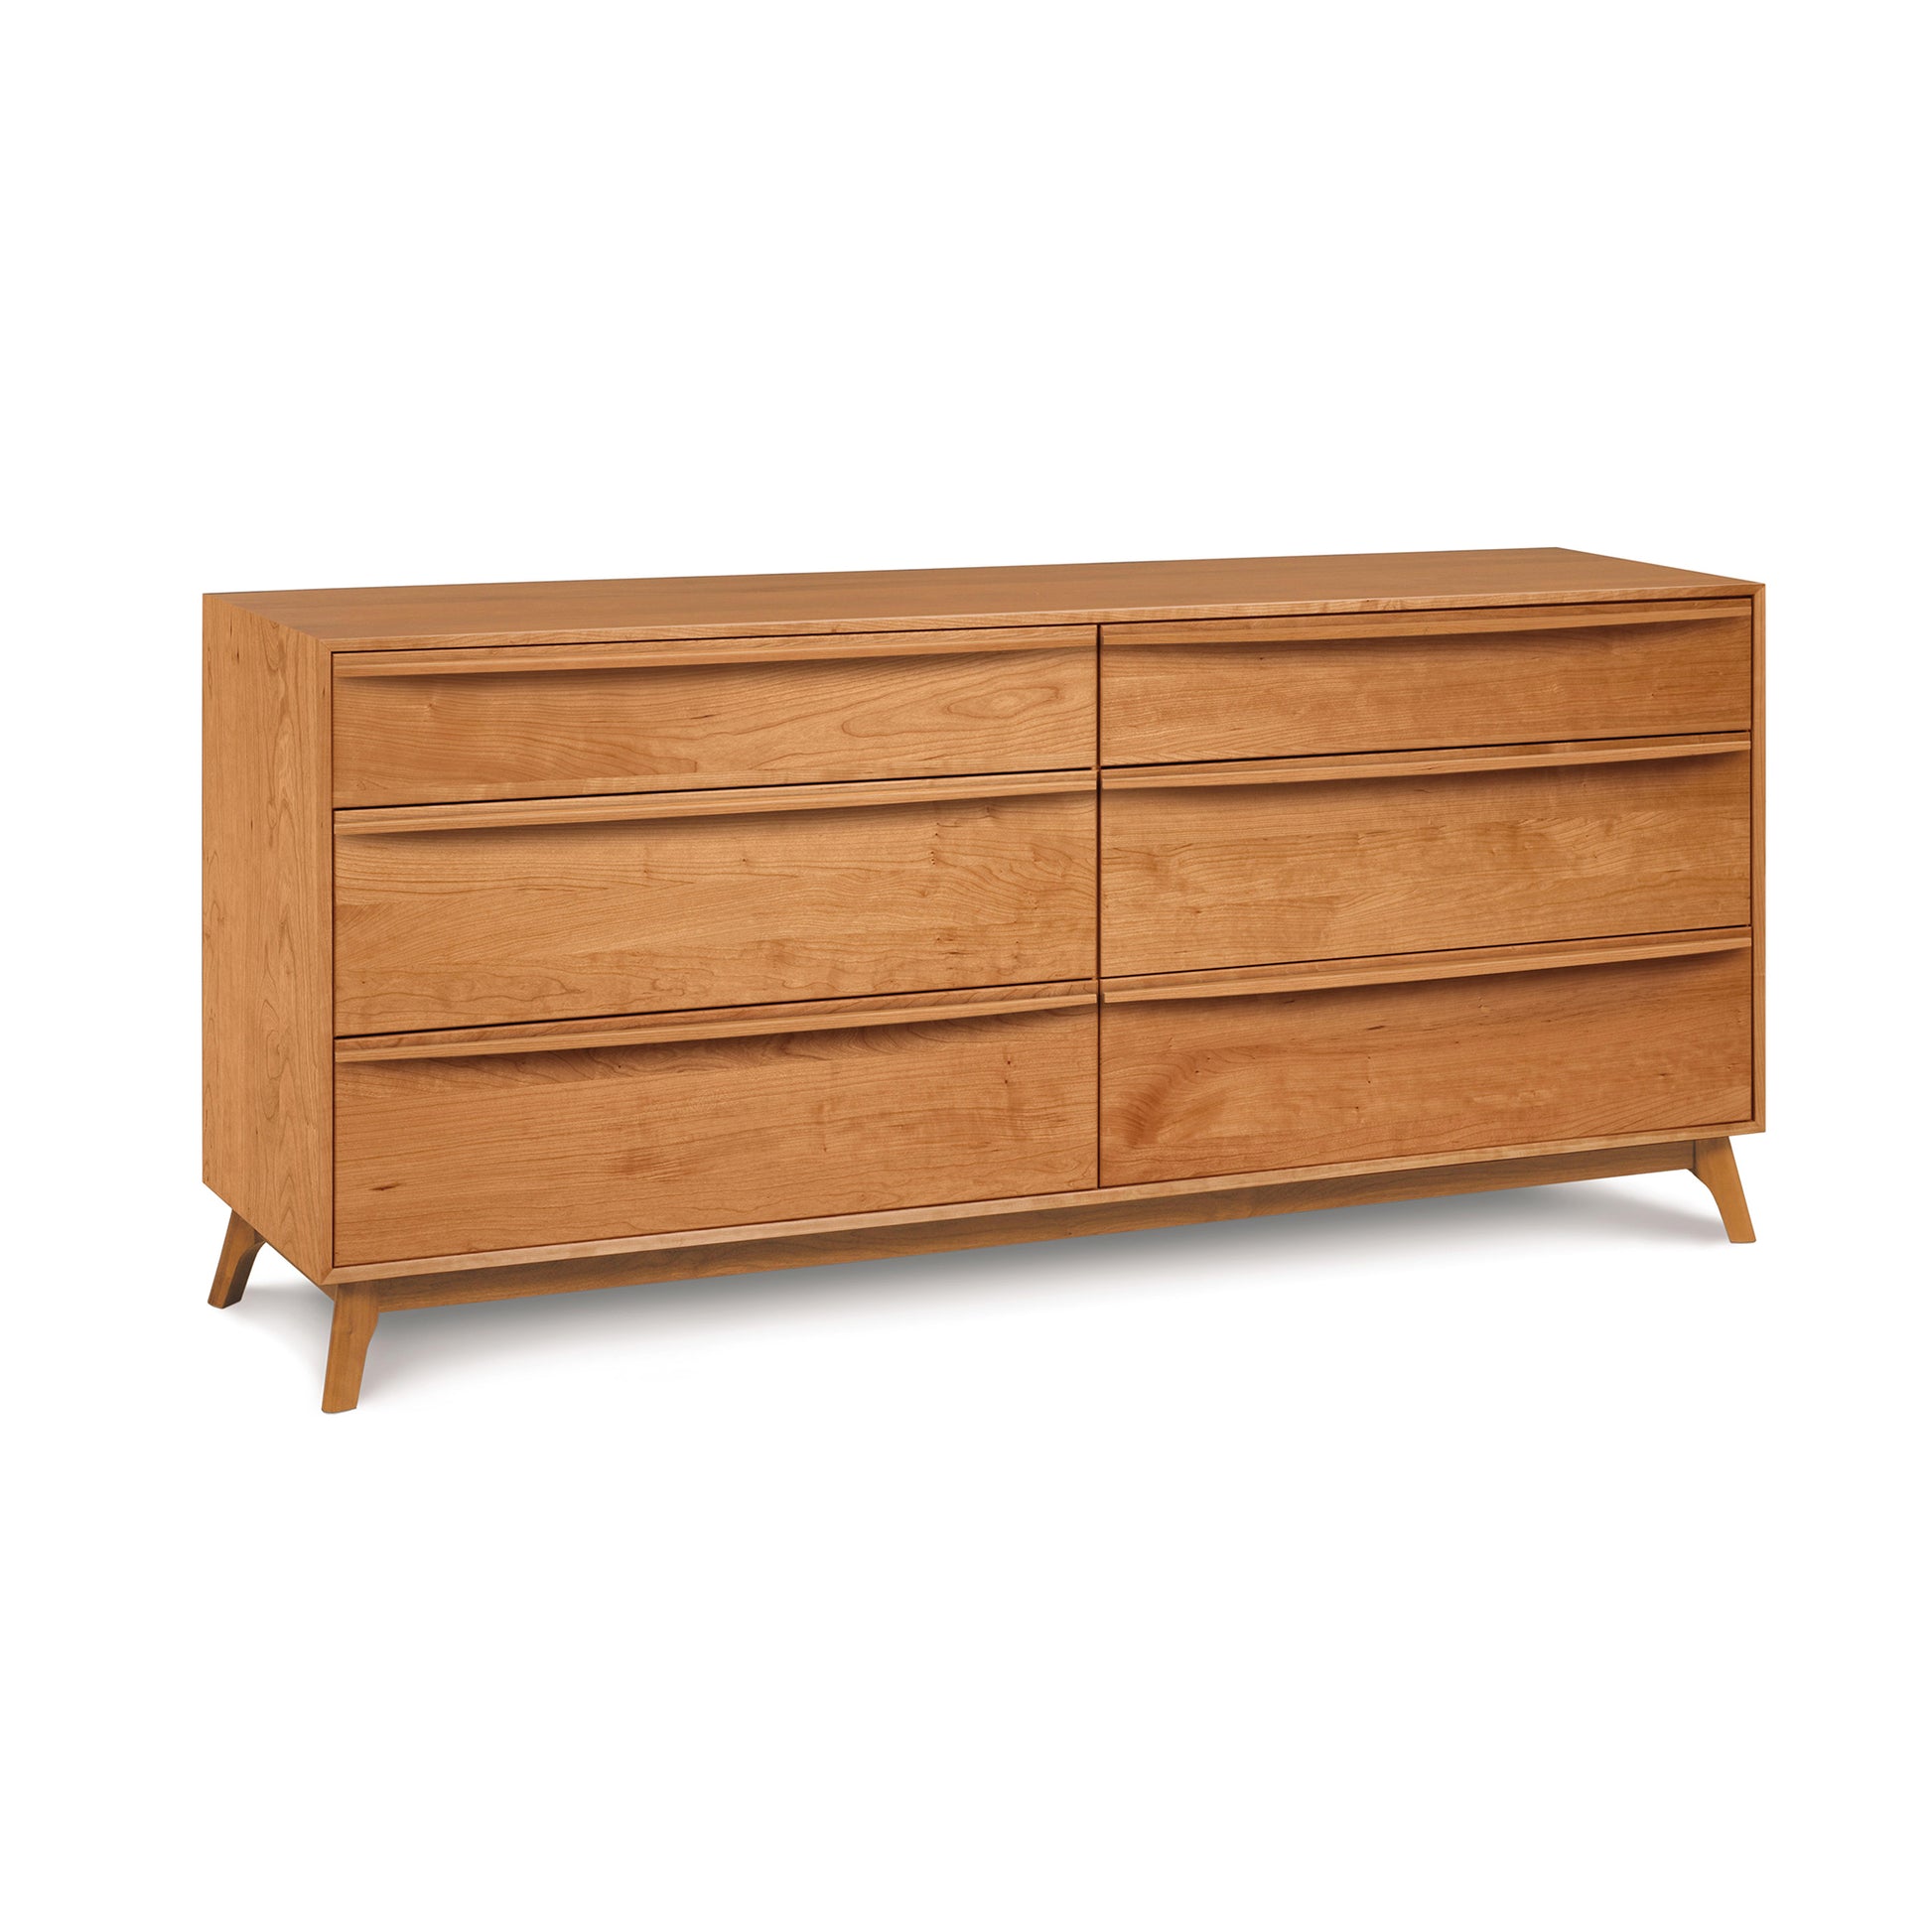 A modern solid natural hardwood Copeland Furniture Catalina 6-Drawer Dresser on angled legs, isolated against a white background.